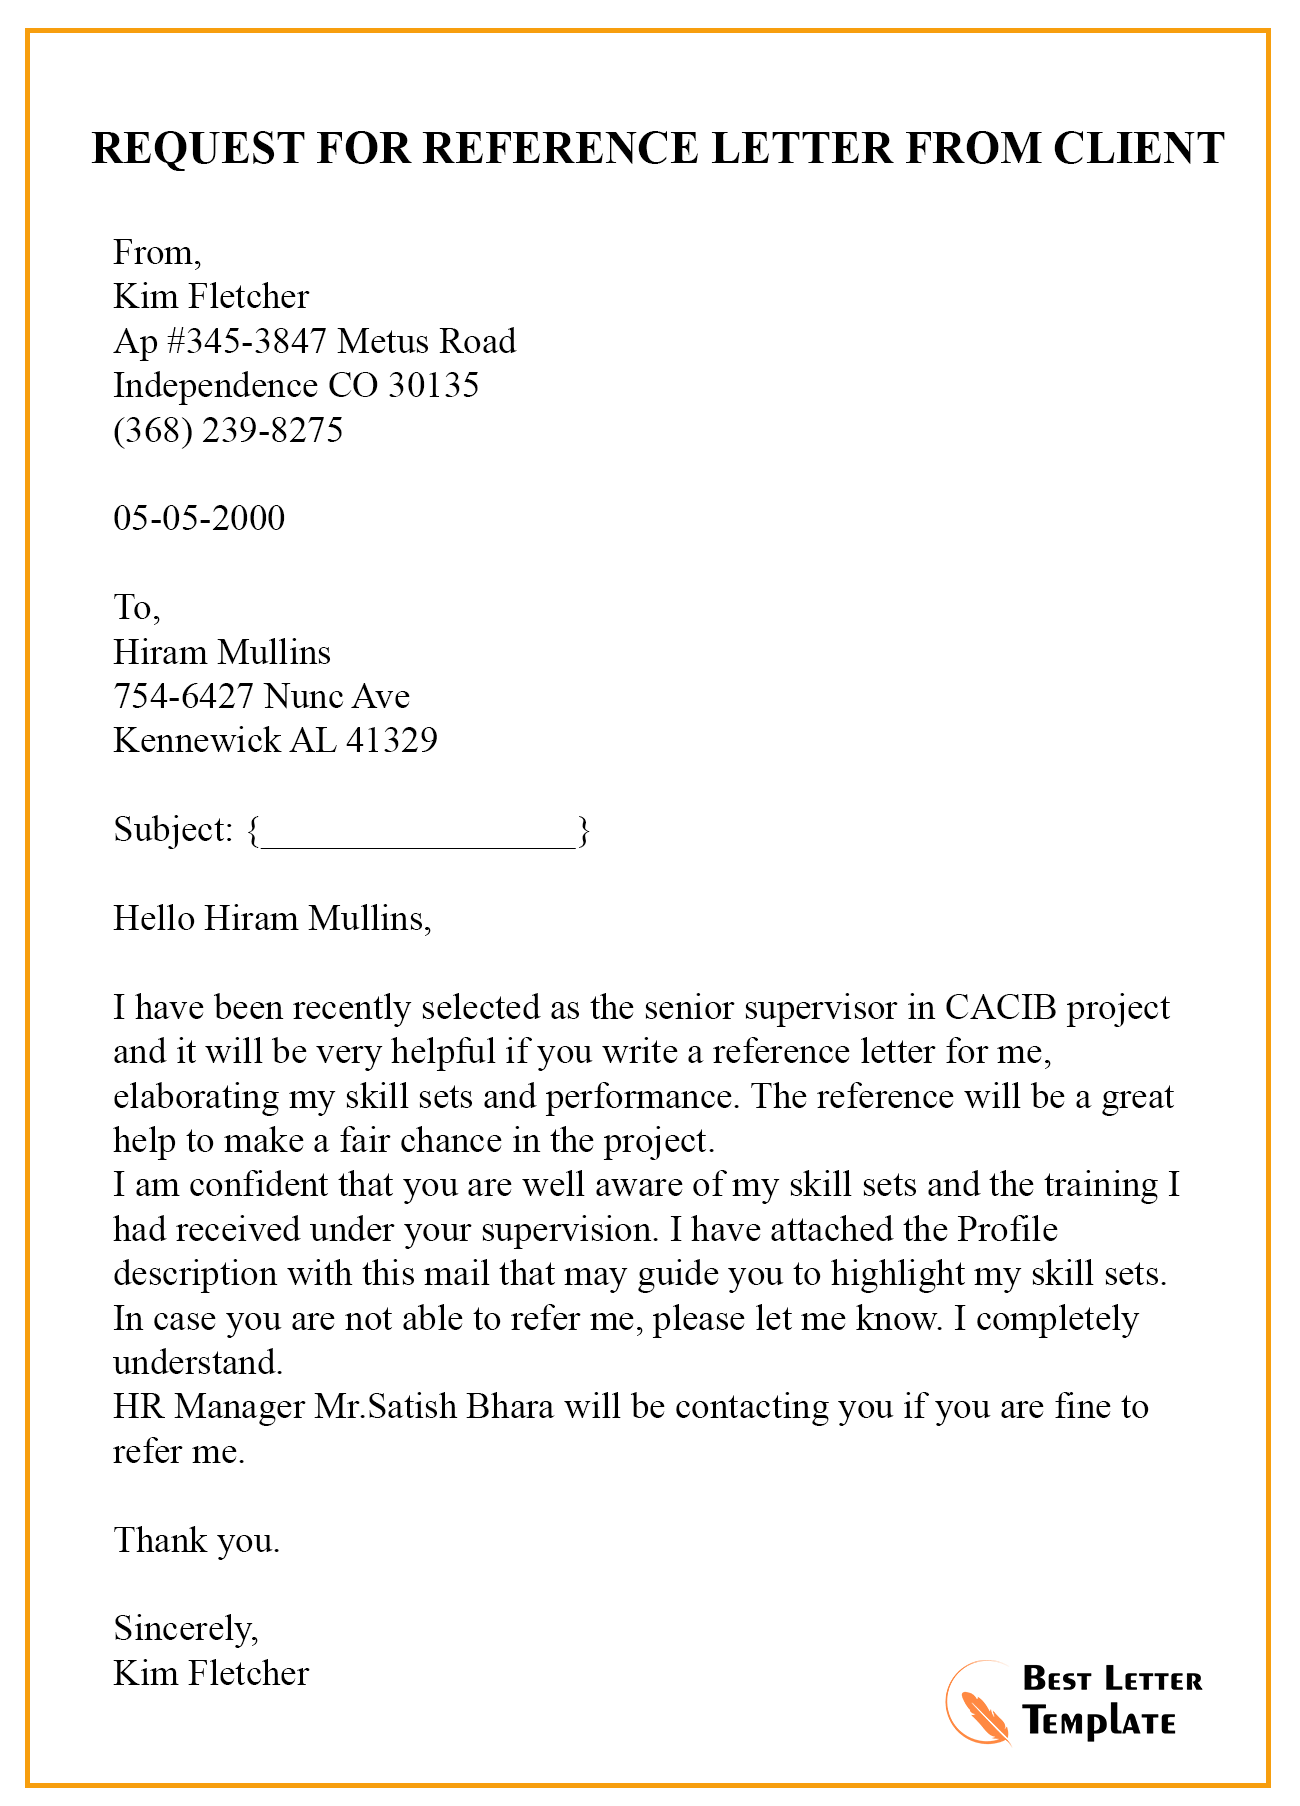 Request for reference letter from client